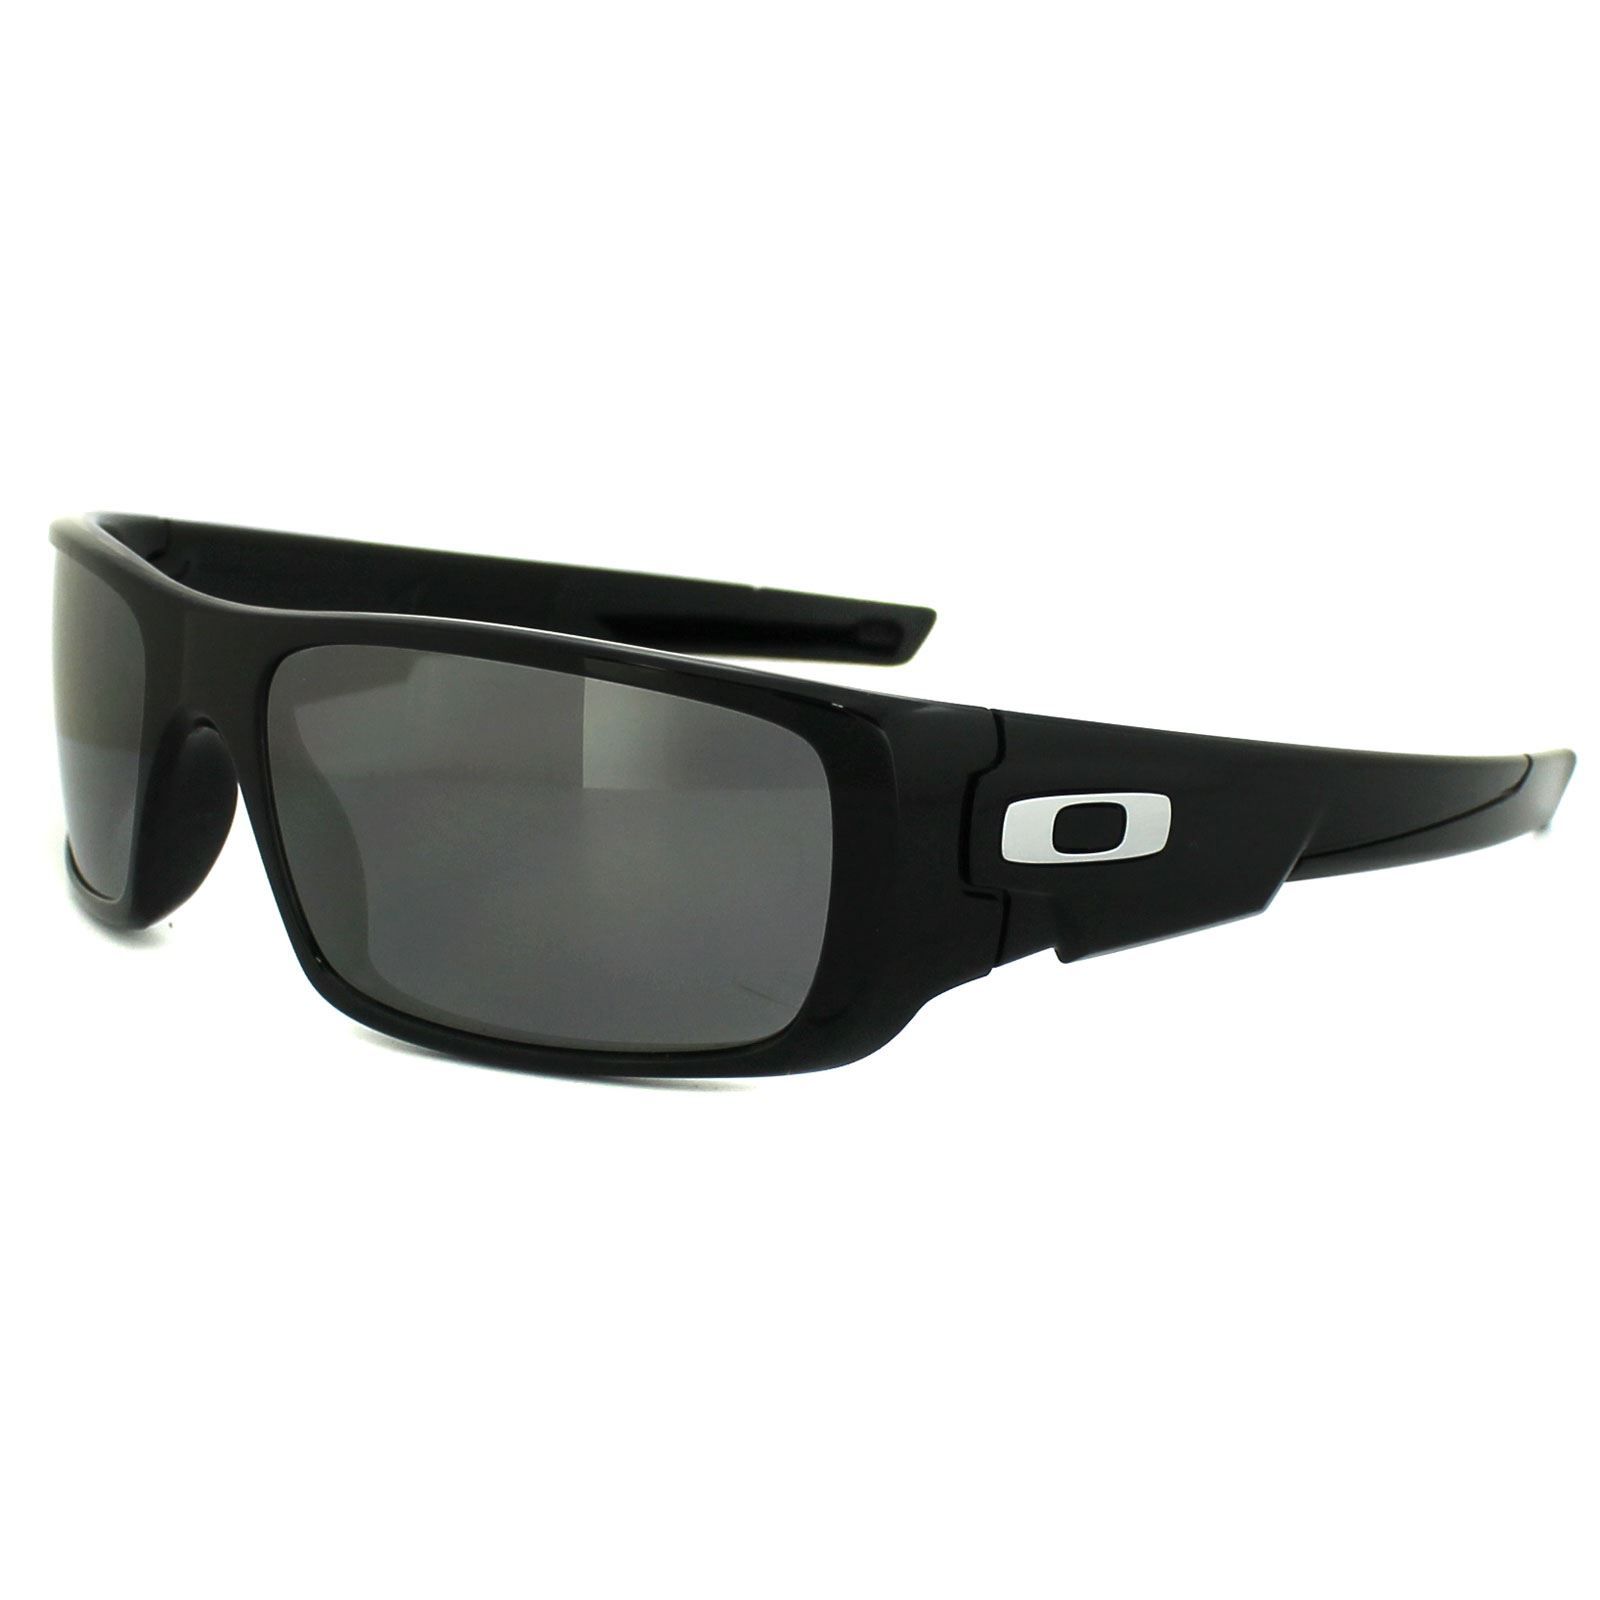 Oakley Sunglasses Crankshaft 9239-01 Polished Black Black Iridium is an evolution of the Gascan and Fuel Cell classic Oakley's brought bang up to date with the latest styling and typically bold Oakley accents. All the usual Oakley hallmarks are there from the 3 point fit to the O-Matter lightweight frame. The size is reasonably large for medium to large faces.